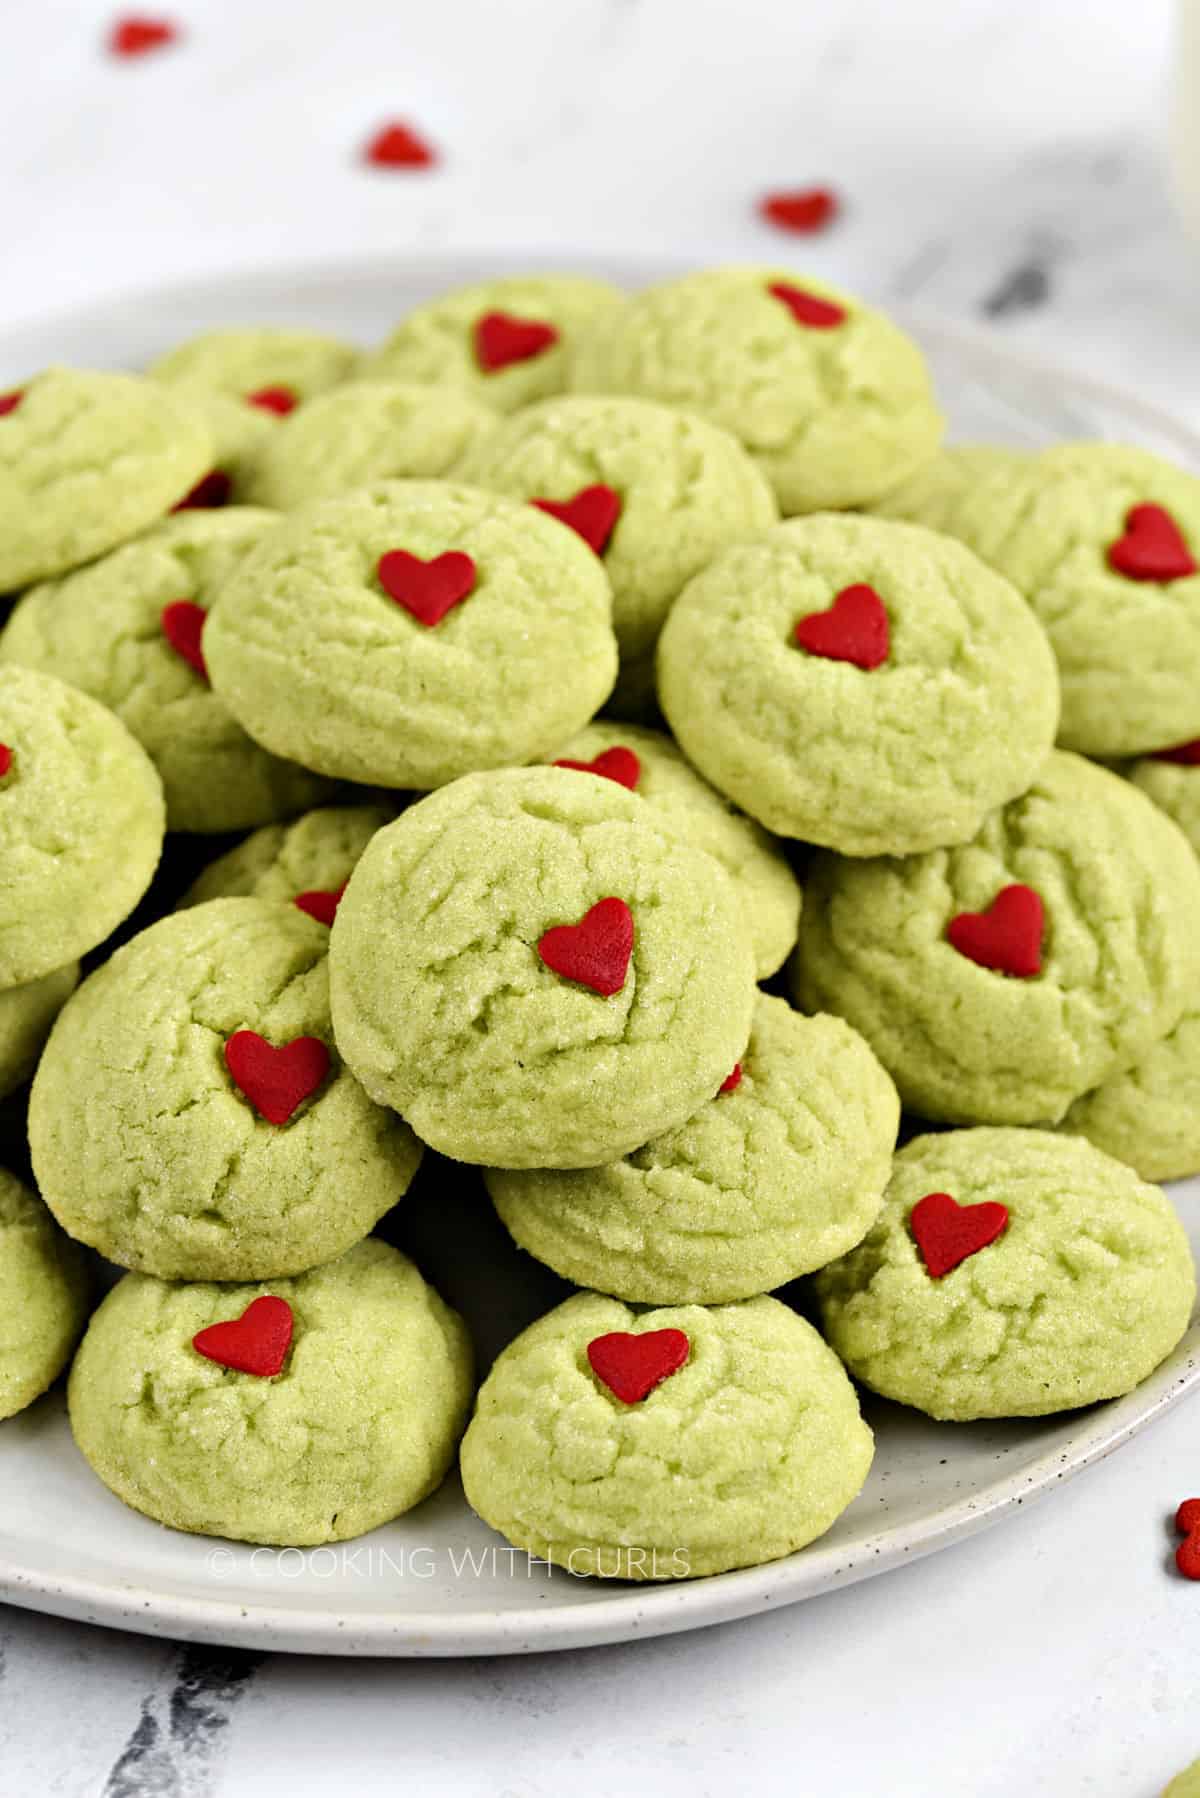 A plate filled with crinkly green sugar cookies with a small red heart in the center.